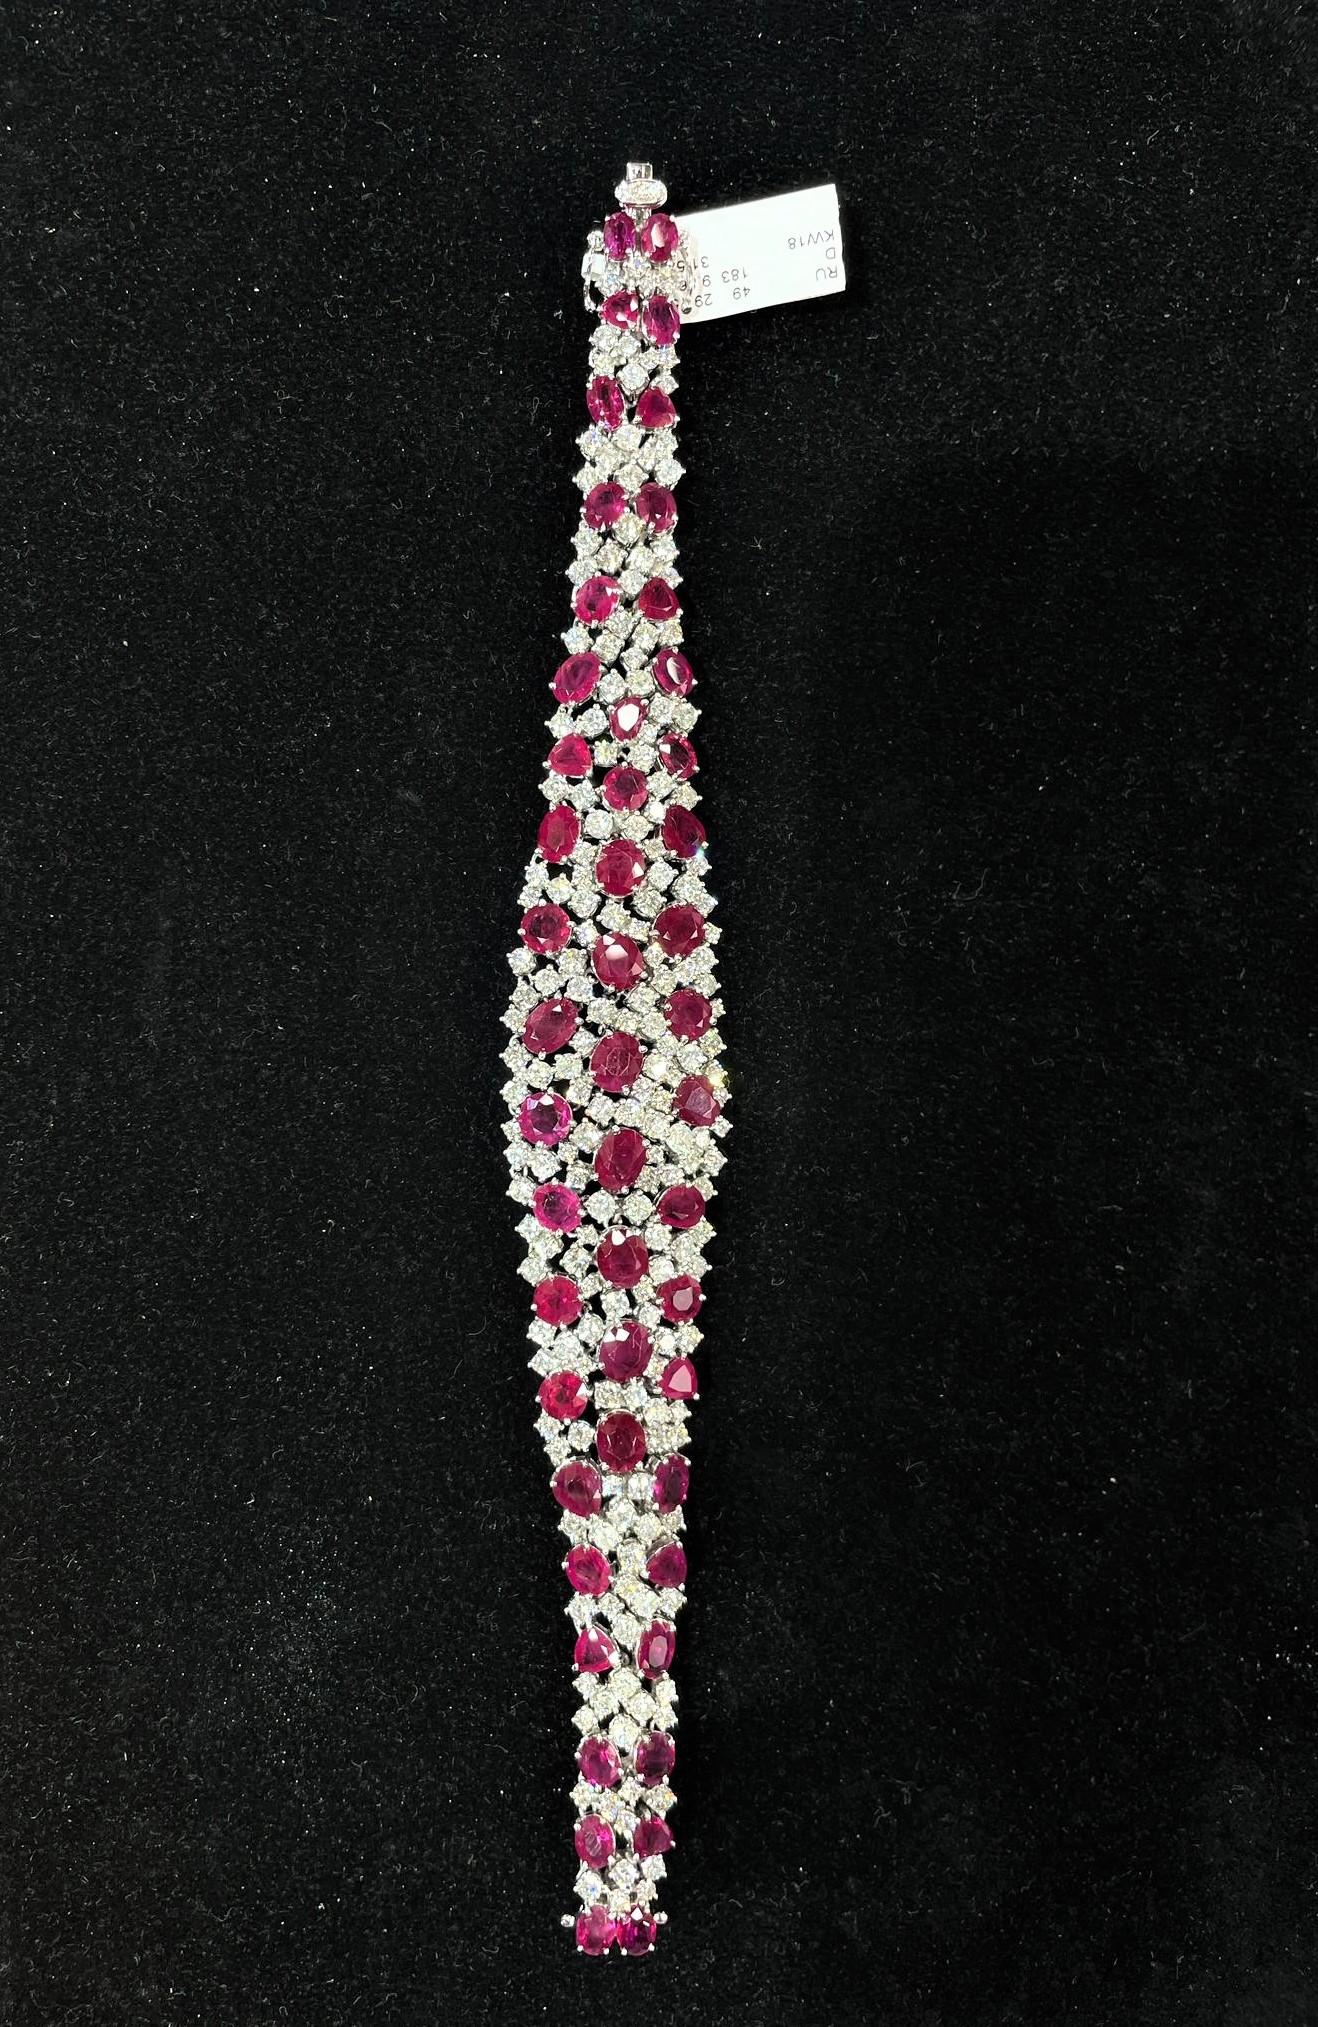 The Following Item we are offering is this Rare Important Radiant 18KT Gold Gorgeous Glittering and Sparkling Magnificent Fancy Rare Burmese Ruby and Diamond Bracelet. Bracelet contains approx 40CTS of Beautiful Fancy Burmese Rubies and Diamonds!!!